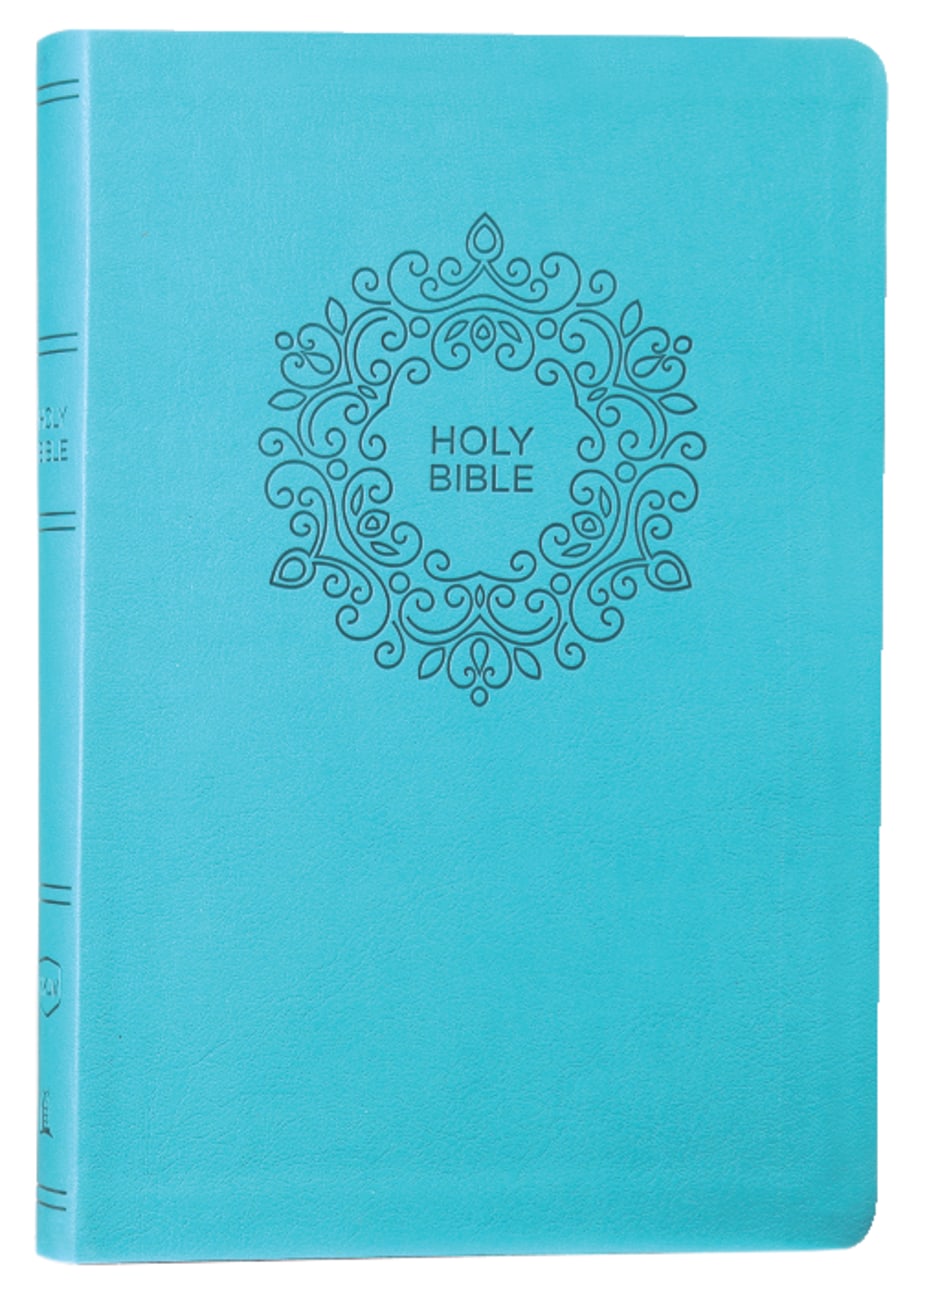 B NKJV VALUE THINLINE BIBLE LARGE PRINT TURQUOISE (RED LETTER EDITION